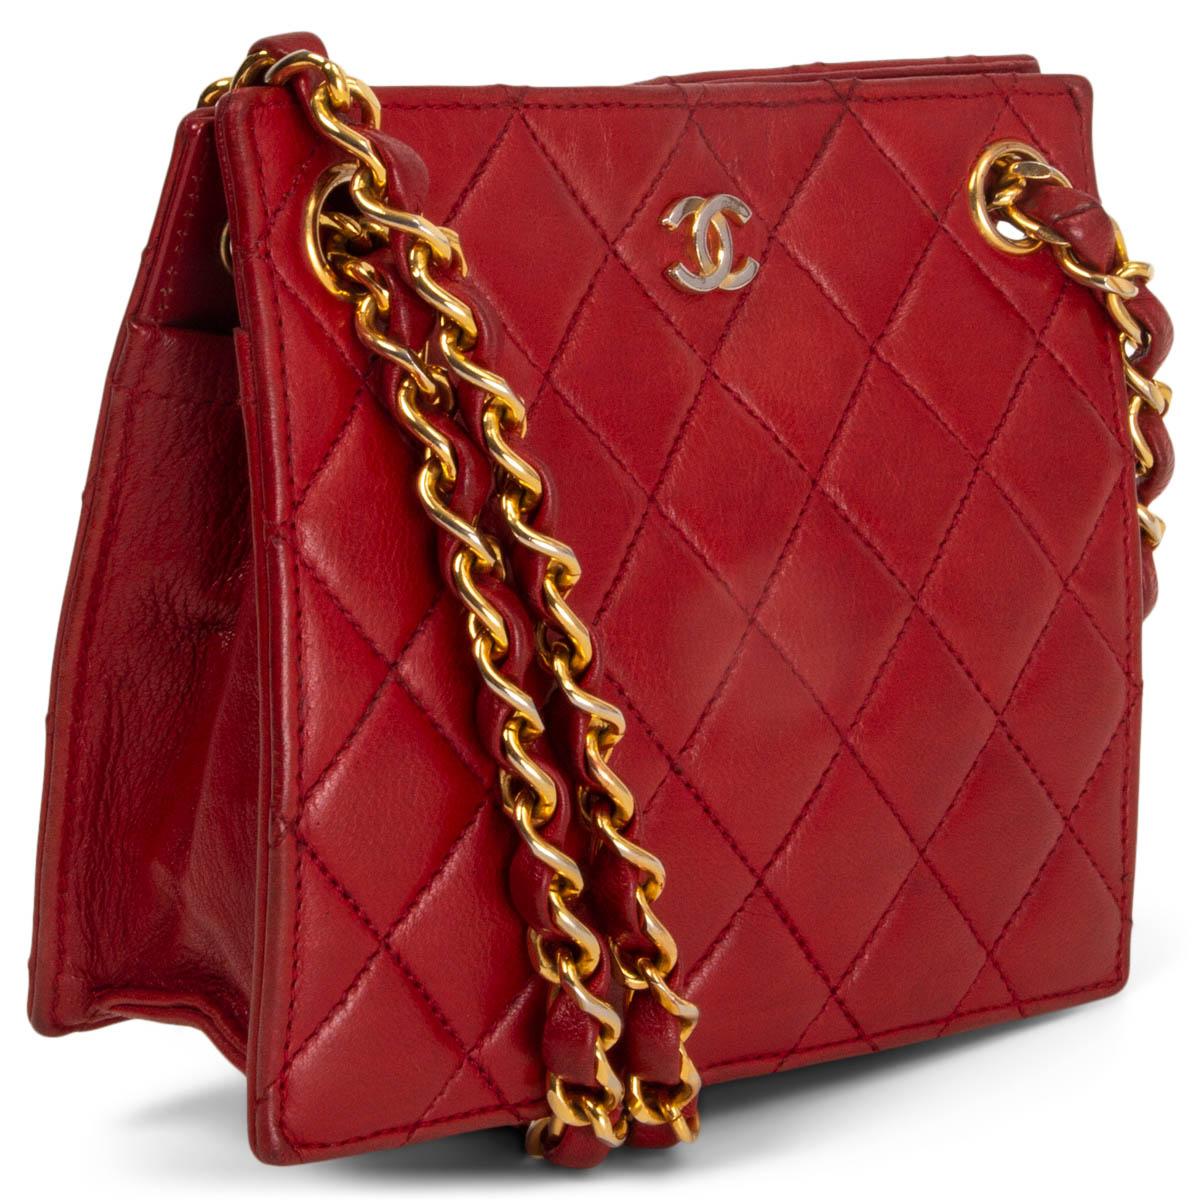 100% authentic Chanel vintage 1980's quilted square mini bag in red lambskin featuring gold-tone hardware. Opens with a push-lock on the inside and is embellished with CC logo at front. Can be carried as a shoulder bag or cross body. Has been